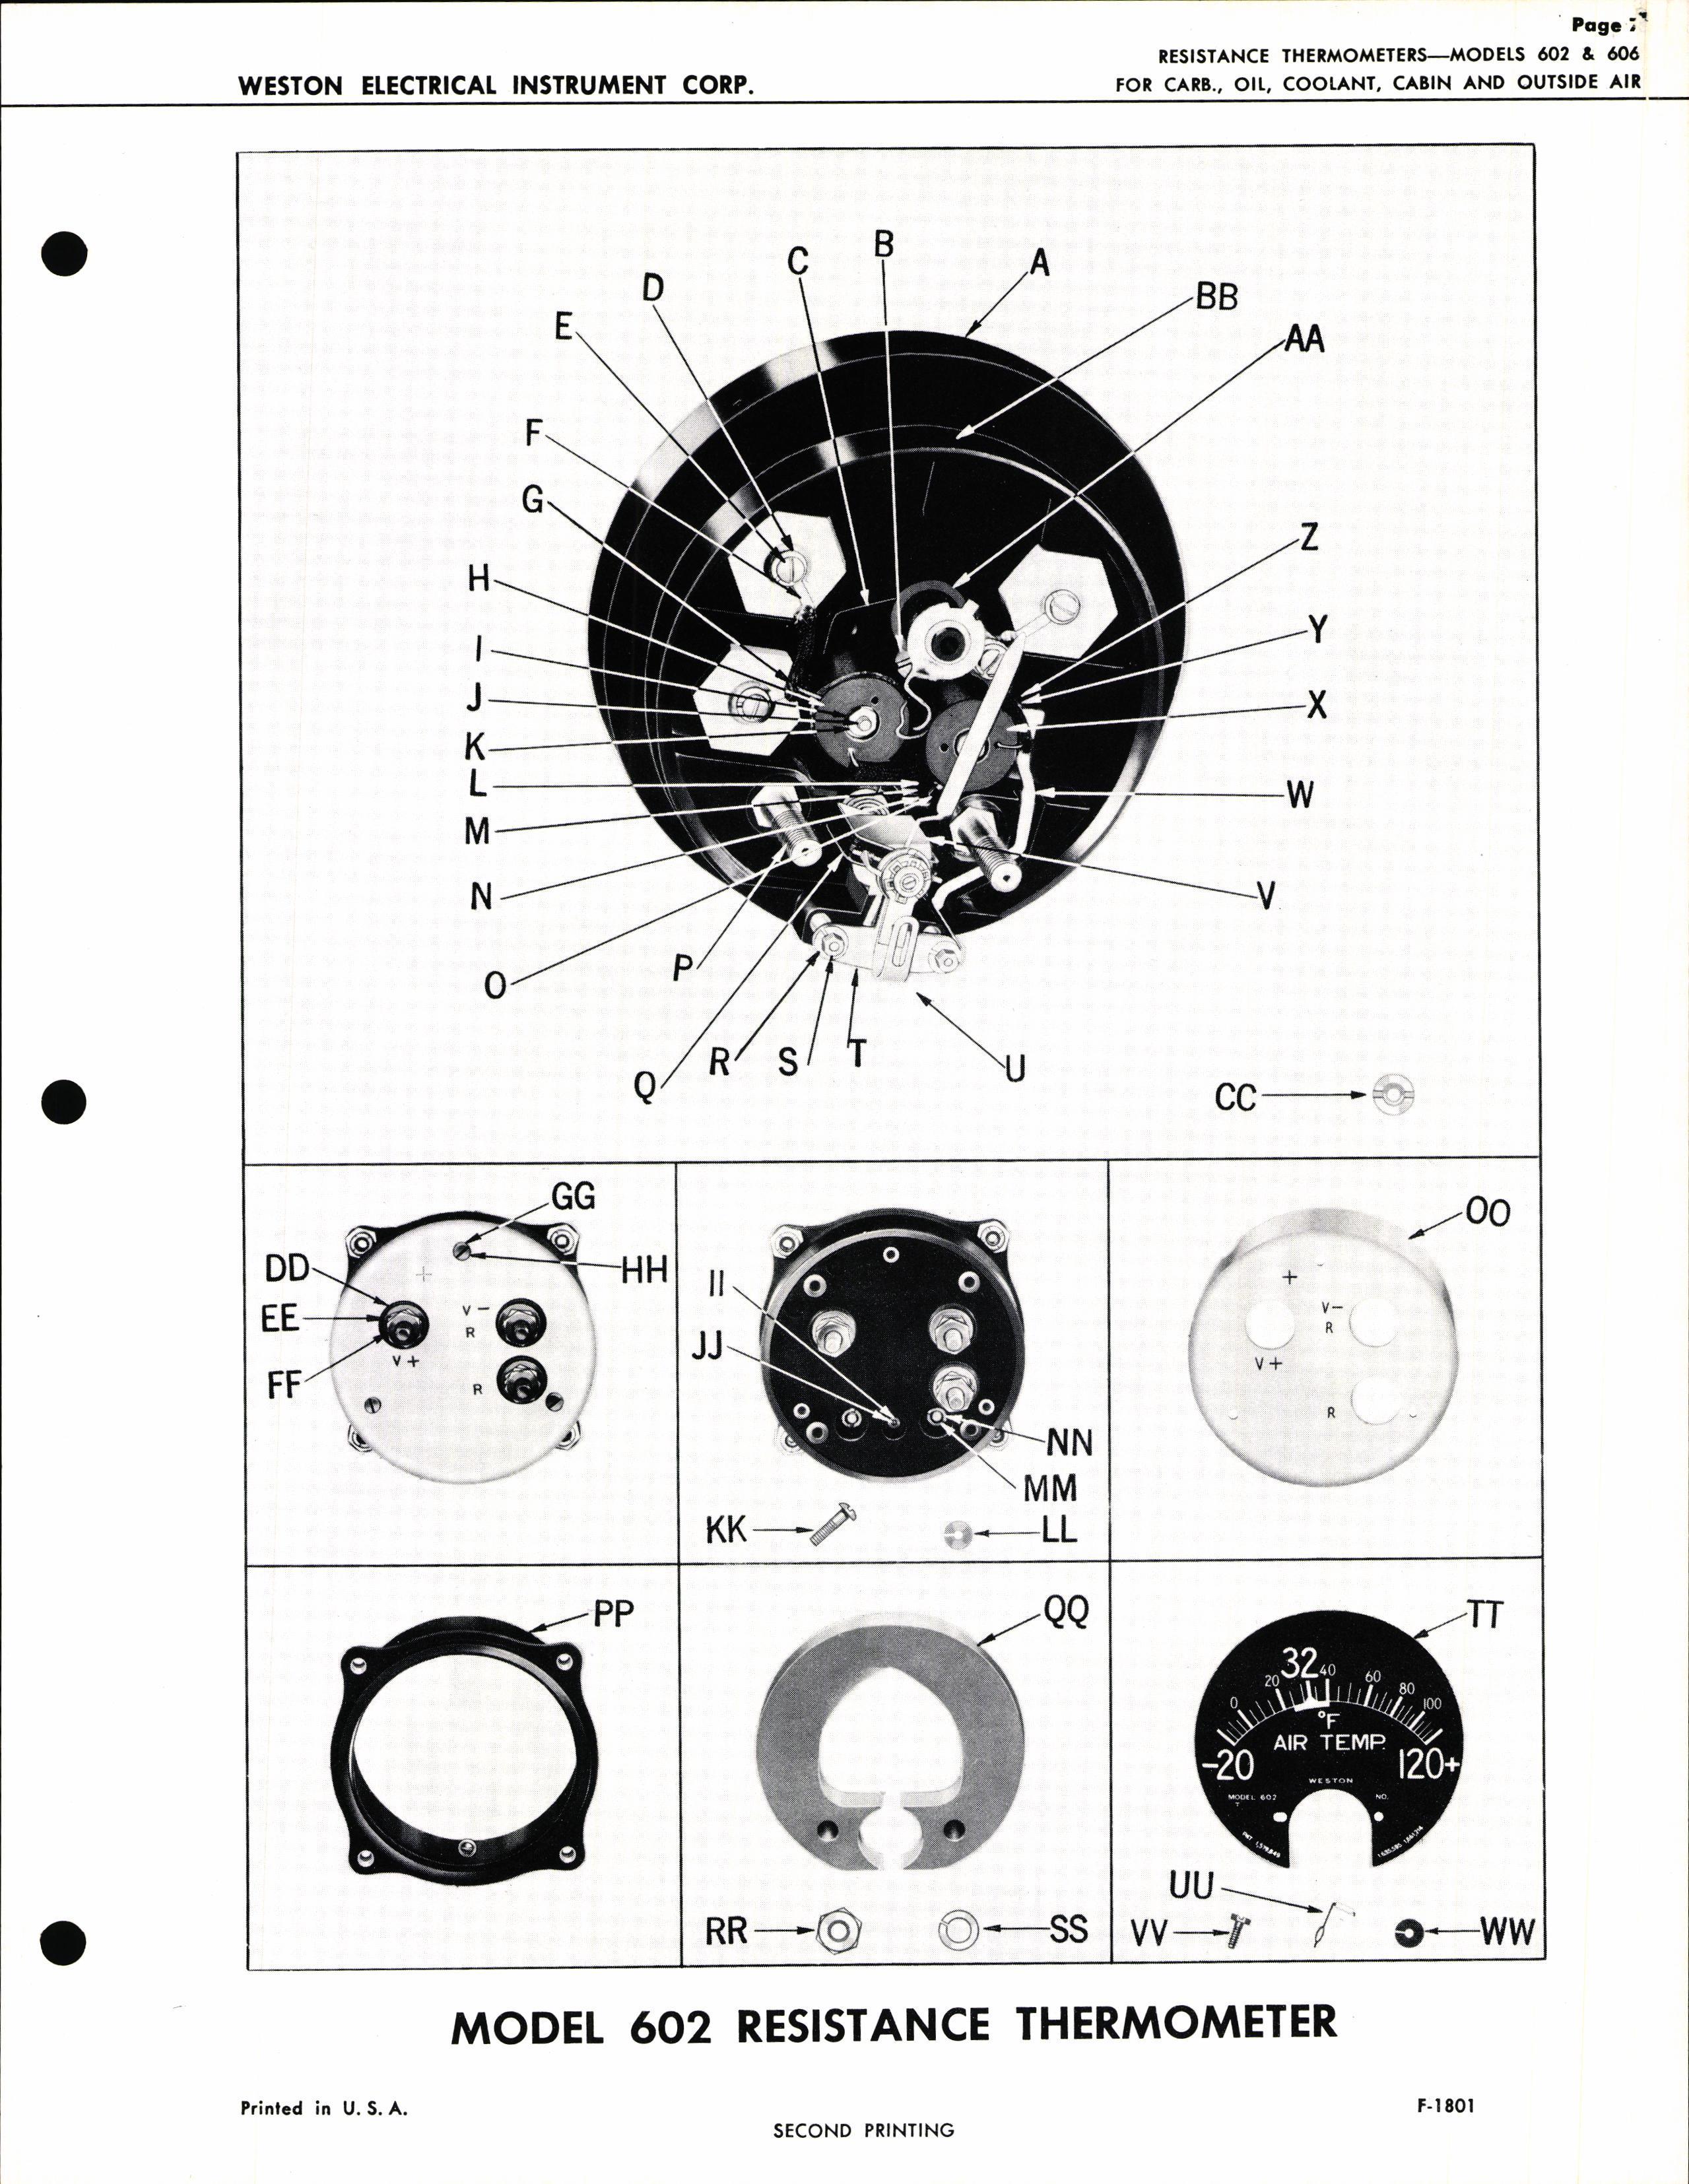 Sample page 7 from AirCorps Library document: Service Instructions for Models 602 & 606 Resistance Thermometers